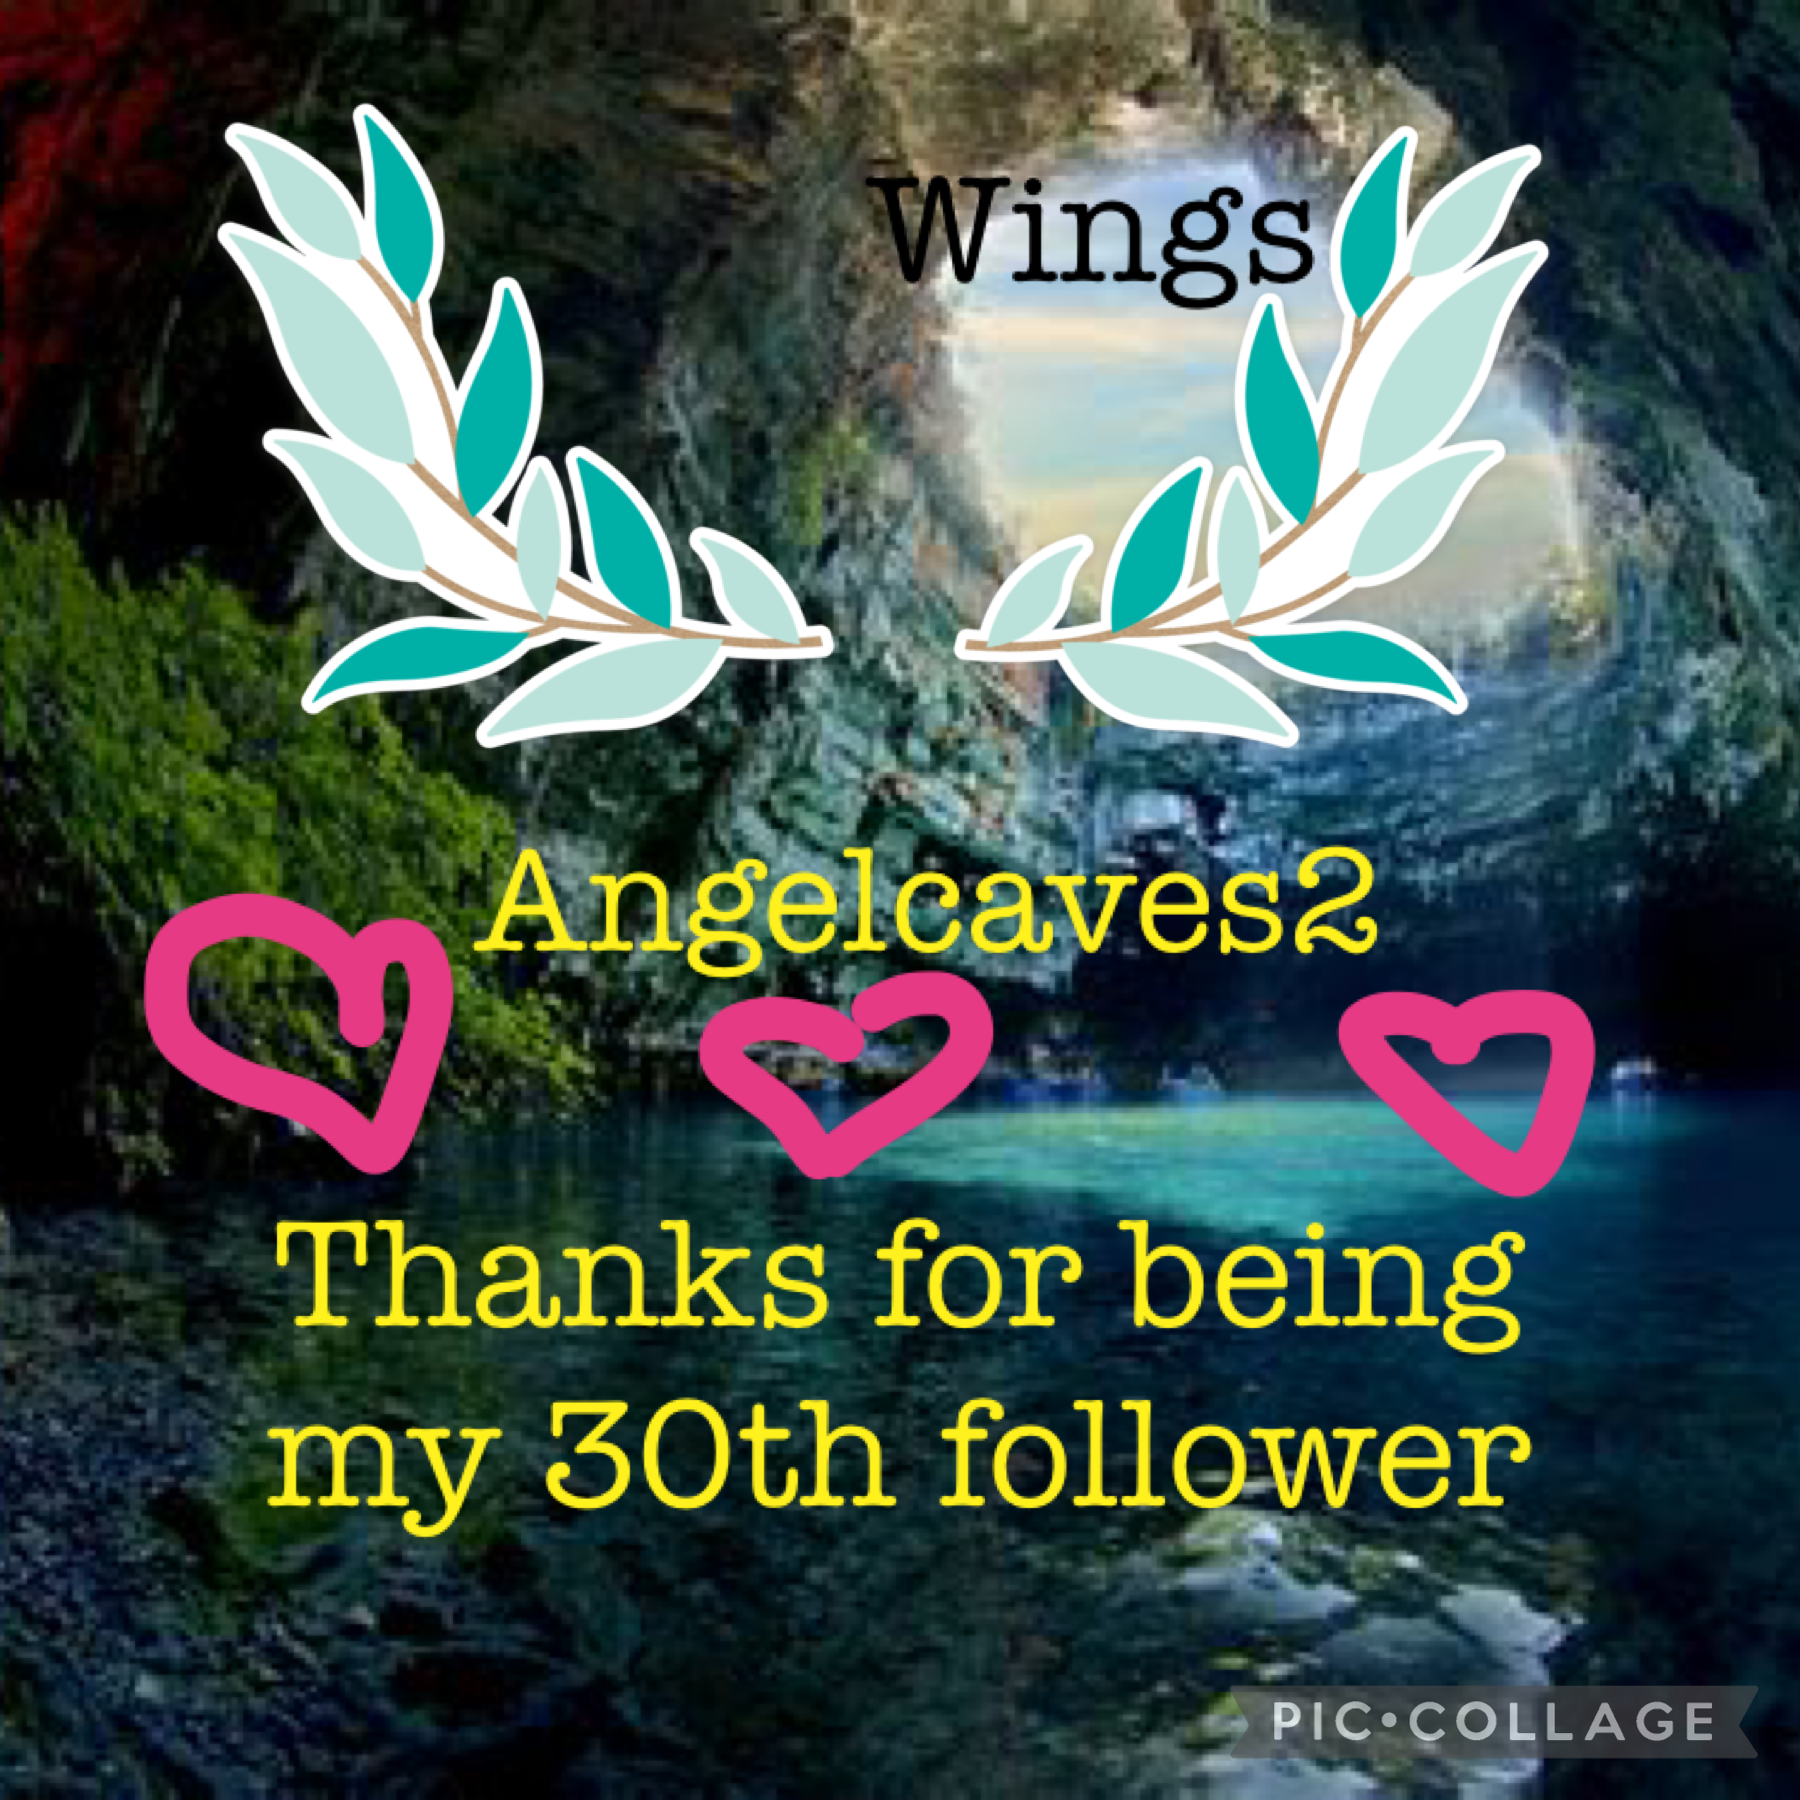 I love all my followers 

My 45th follower will get a shout out 